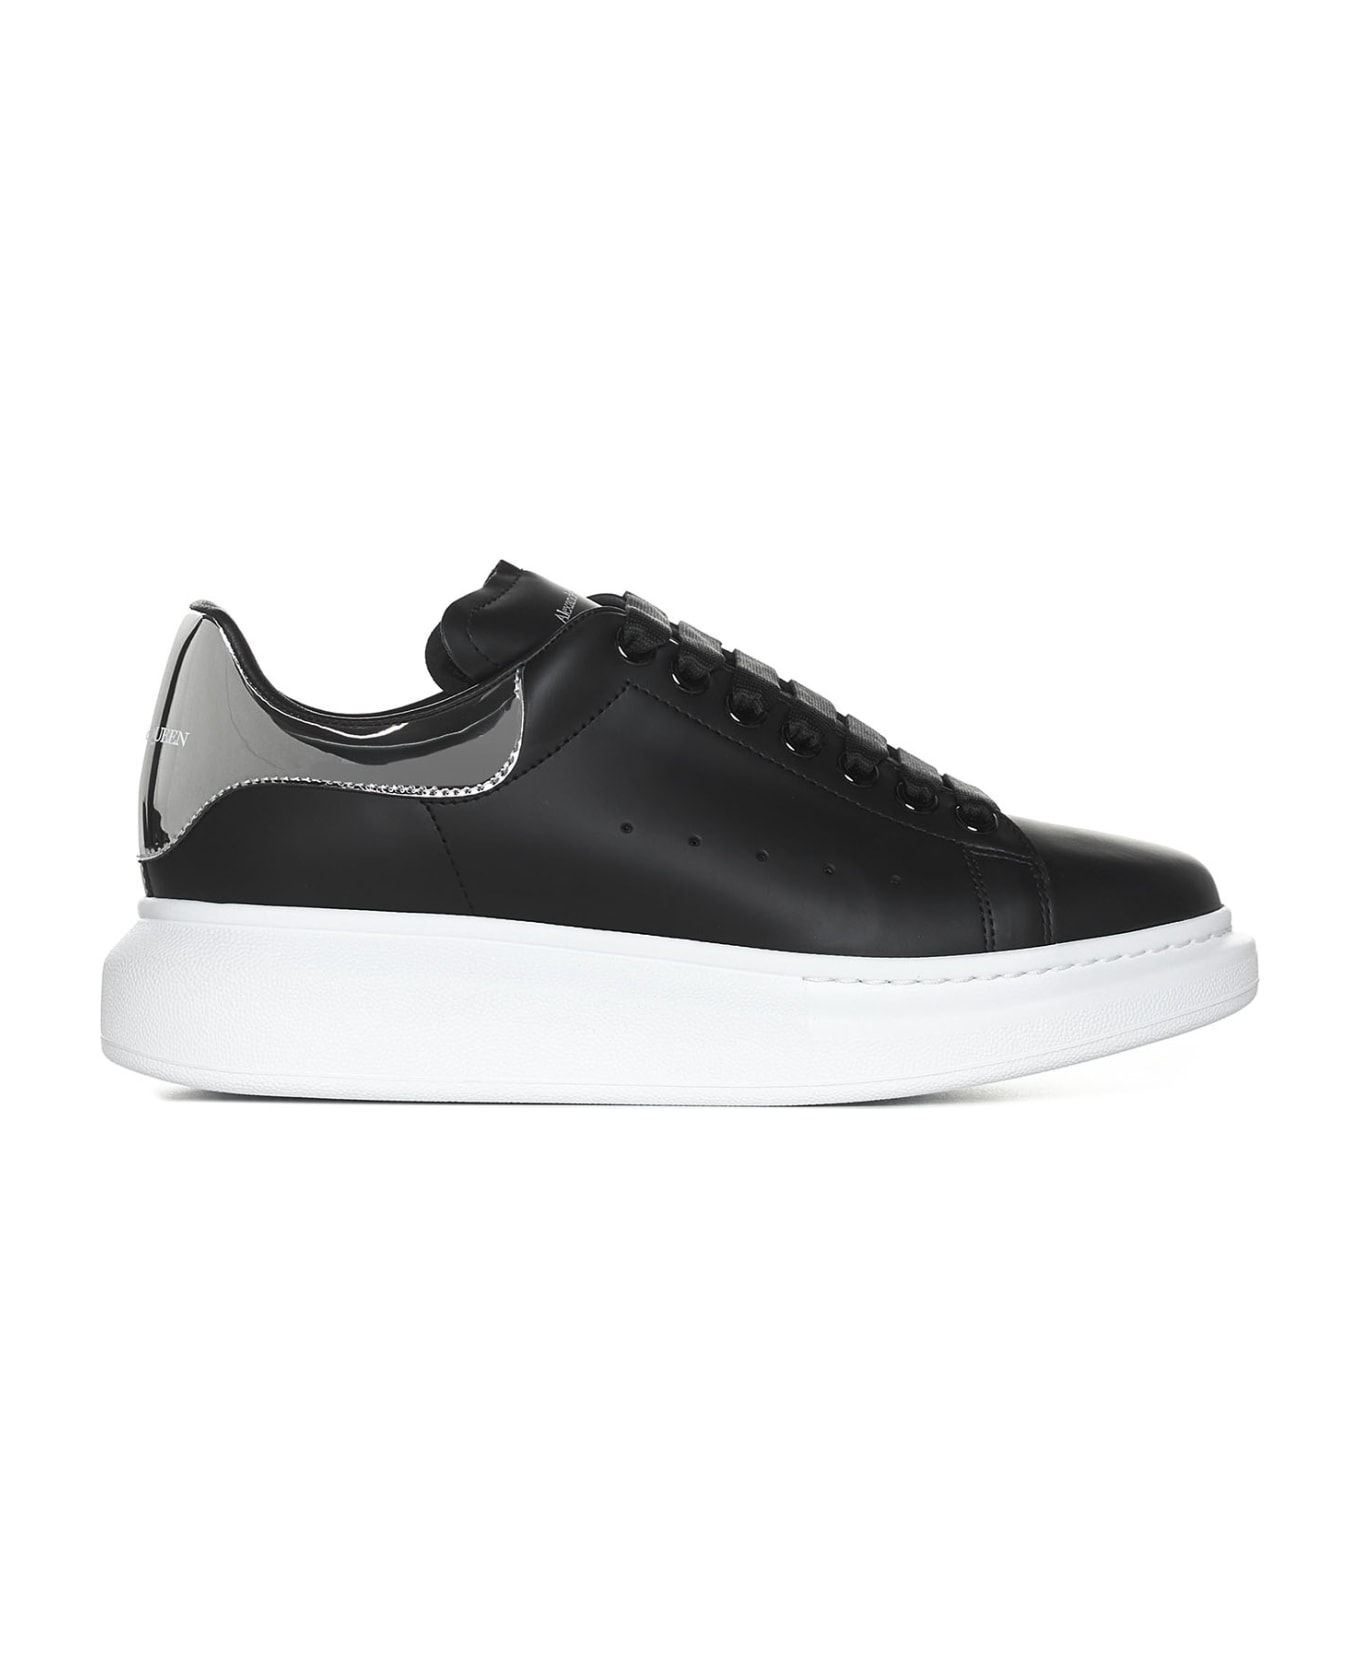 Alexander McQueen Round Toe Laced Sneakers - Black Silver